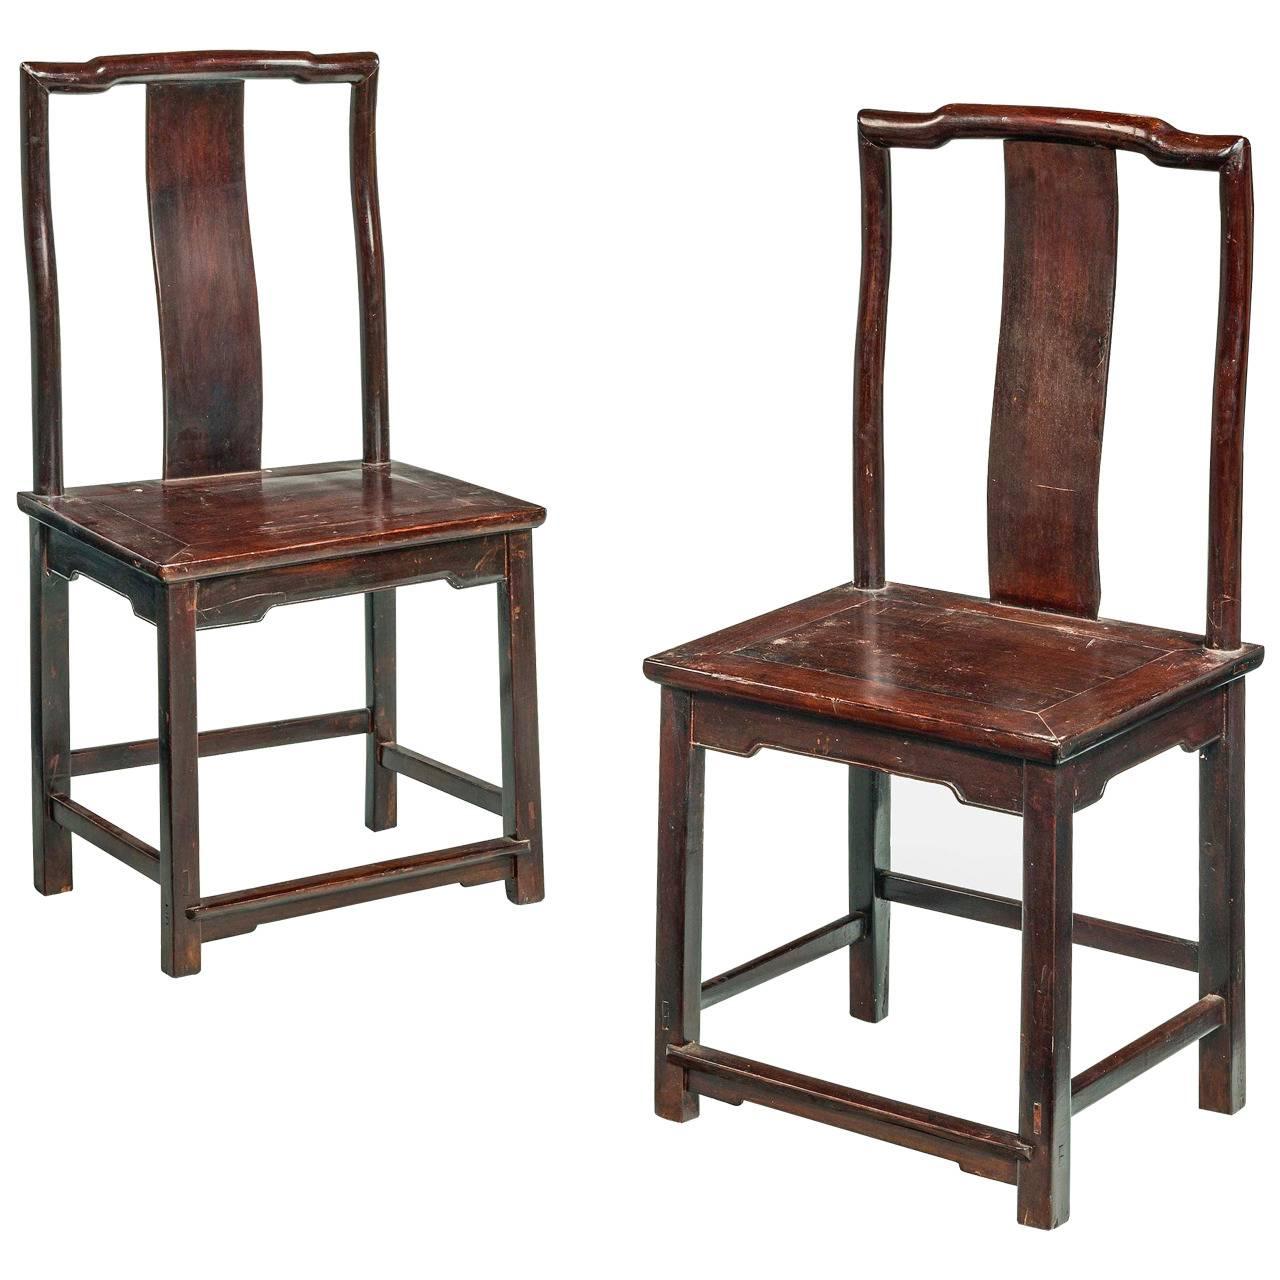 Pair of Early 19th Century Chinese Side Chairs